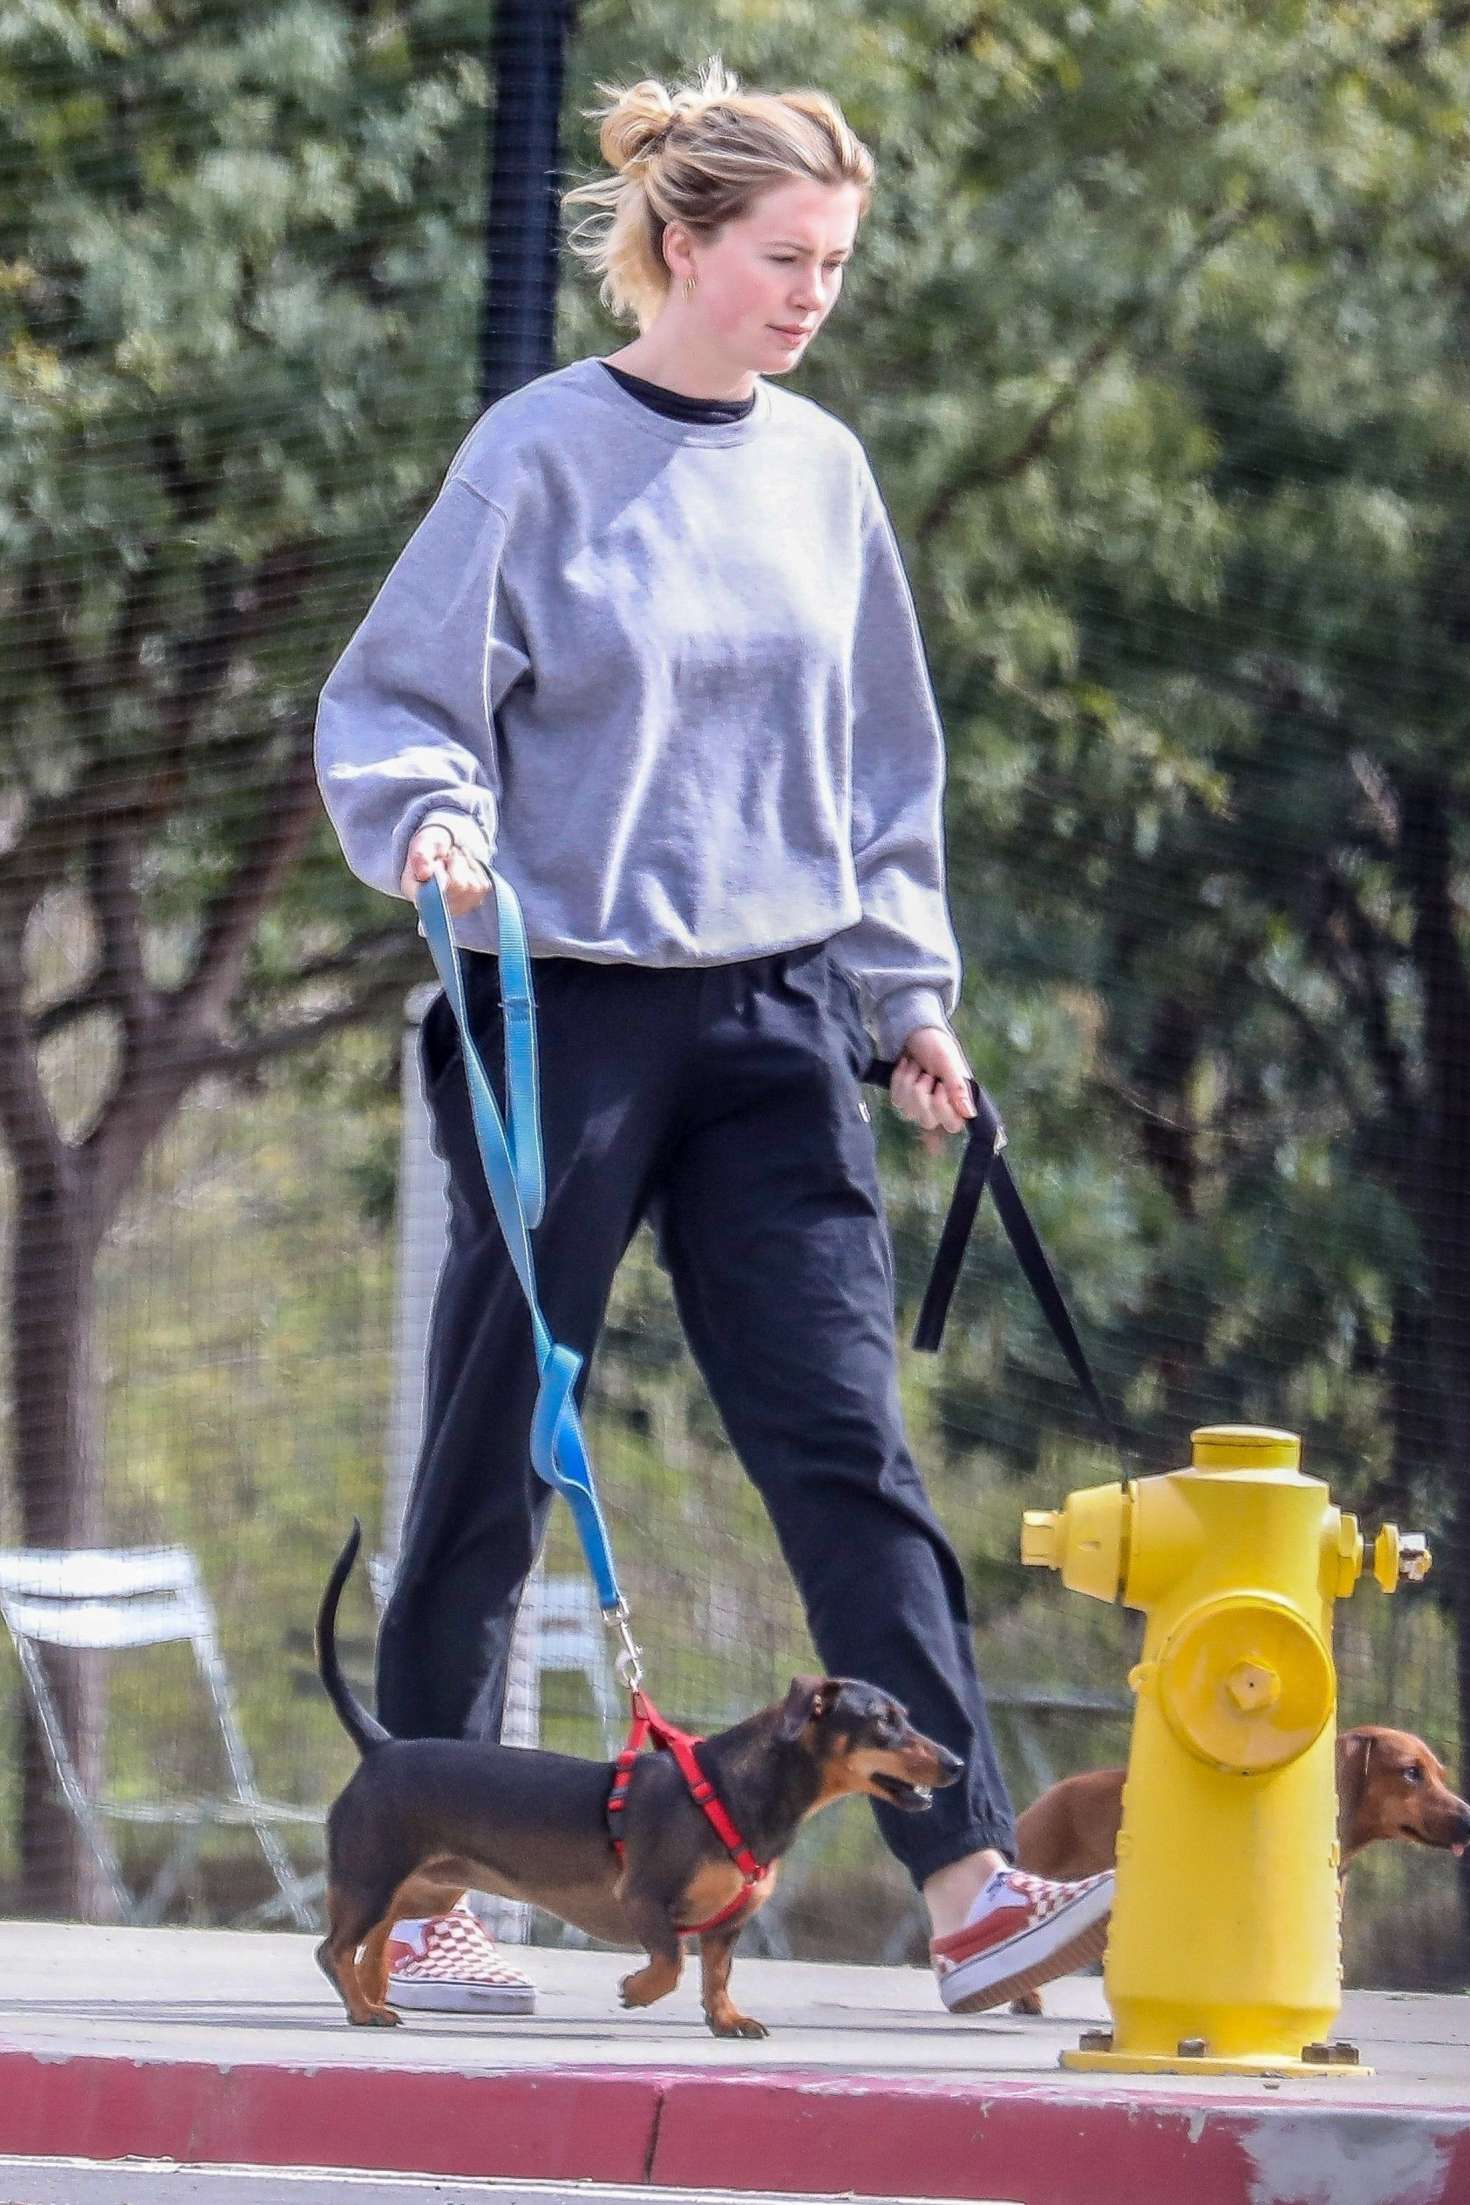 Ireland Baldwin with her Dog at a Park in Santa Monica